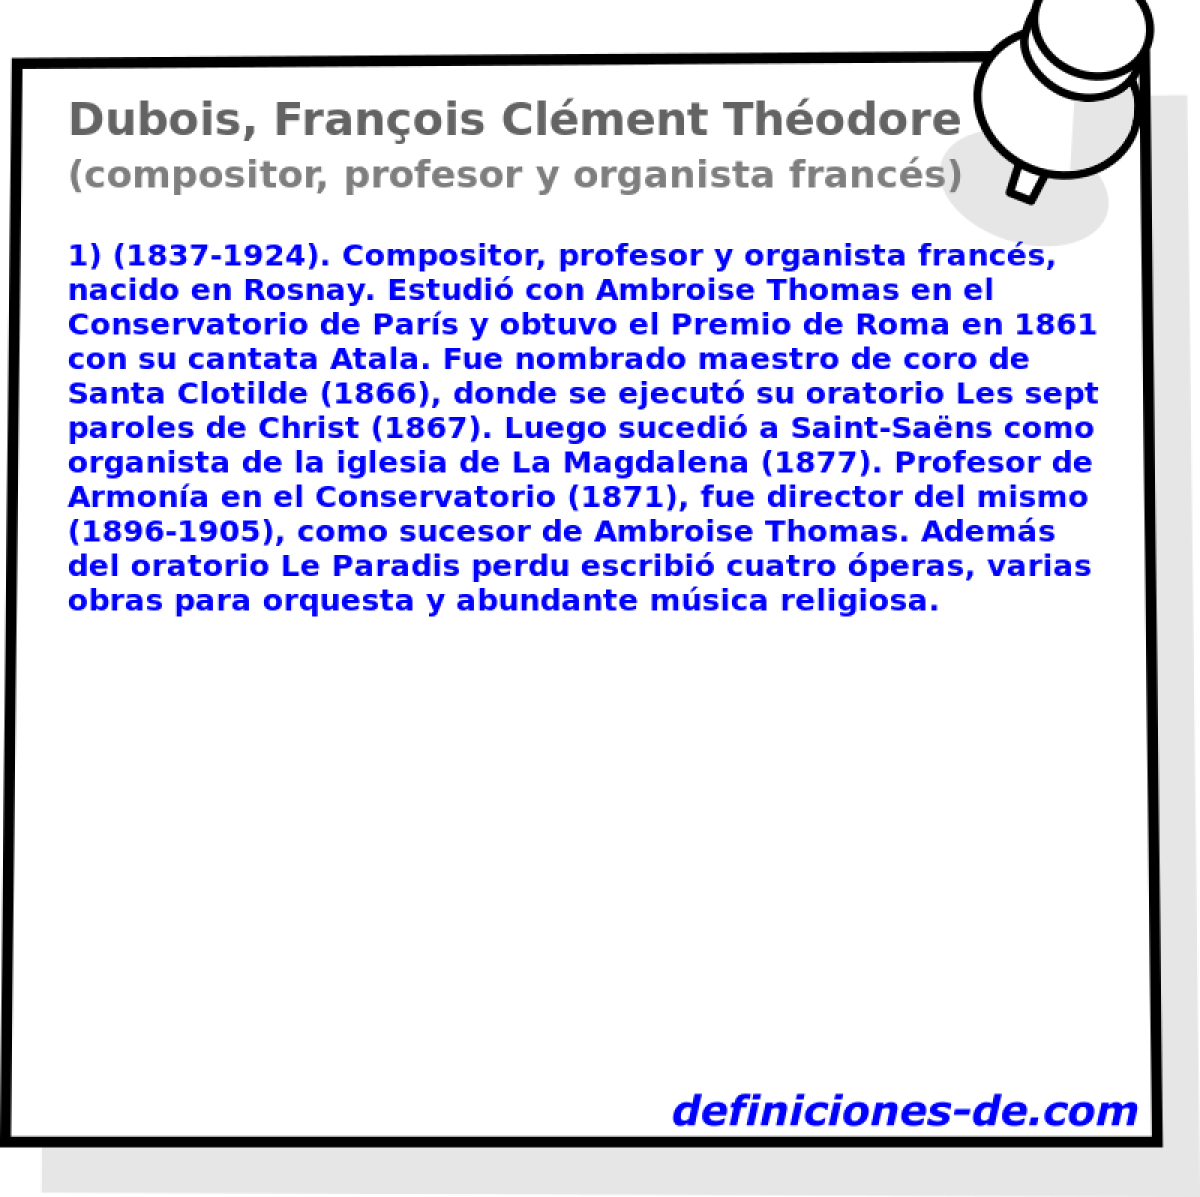 Dubois, Franois Clment Thodore (compositor, profesor y organista francs)